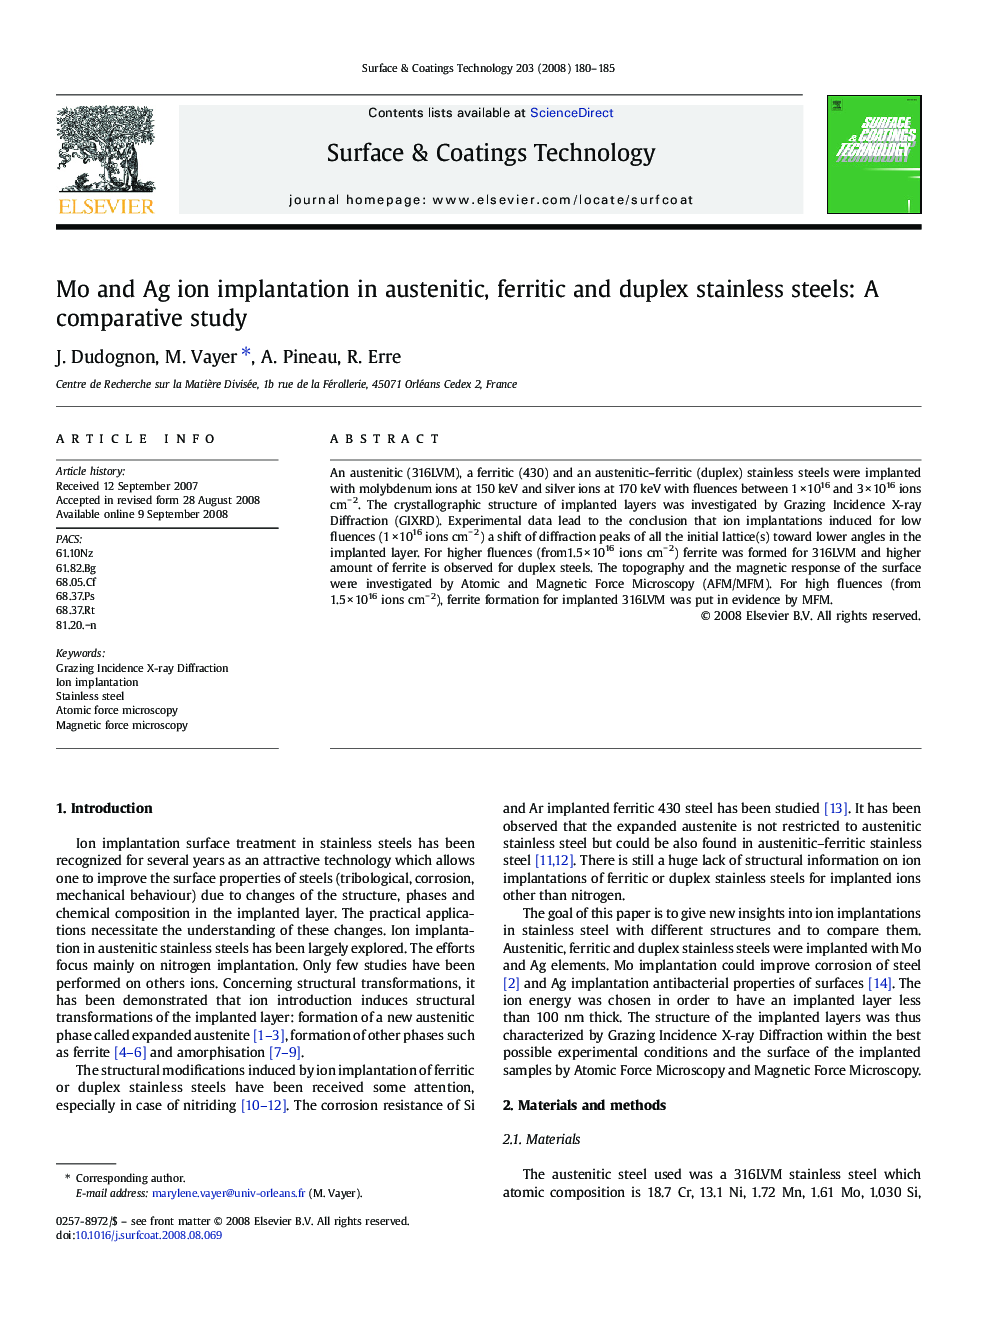 Mo and Ag ion implantation in austenitic, ferritic and duplex stainless steels: A comparative study